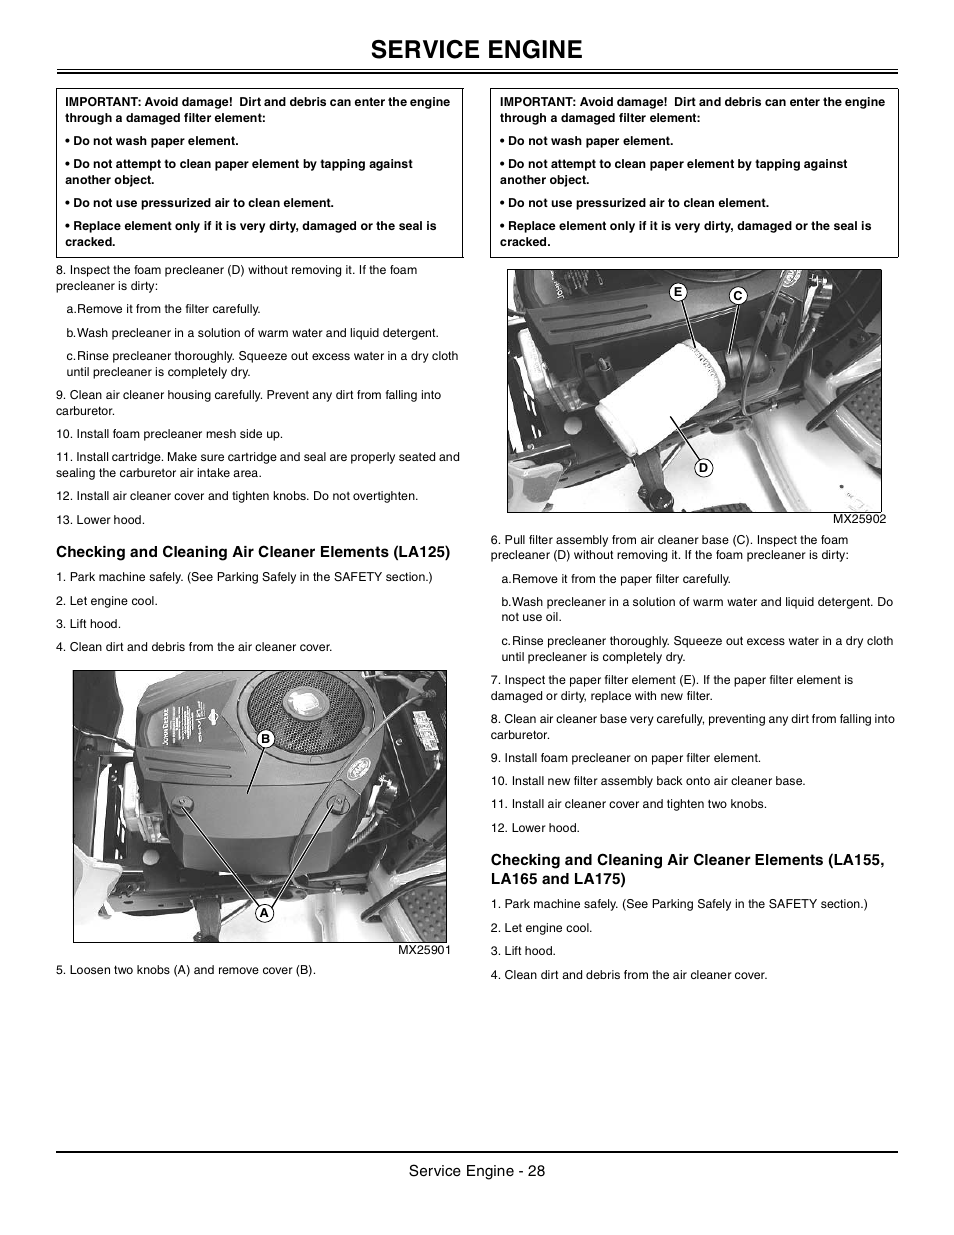 Checking and cleaning air cleaner elements (la125), Service engine | John Deere la105 User Manual | Page 29 / 52